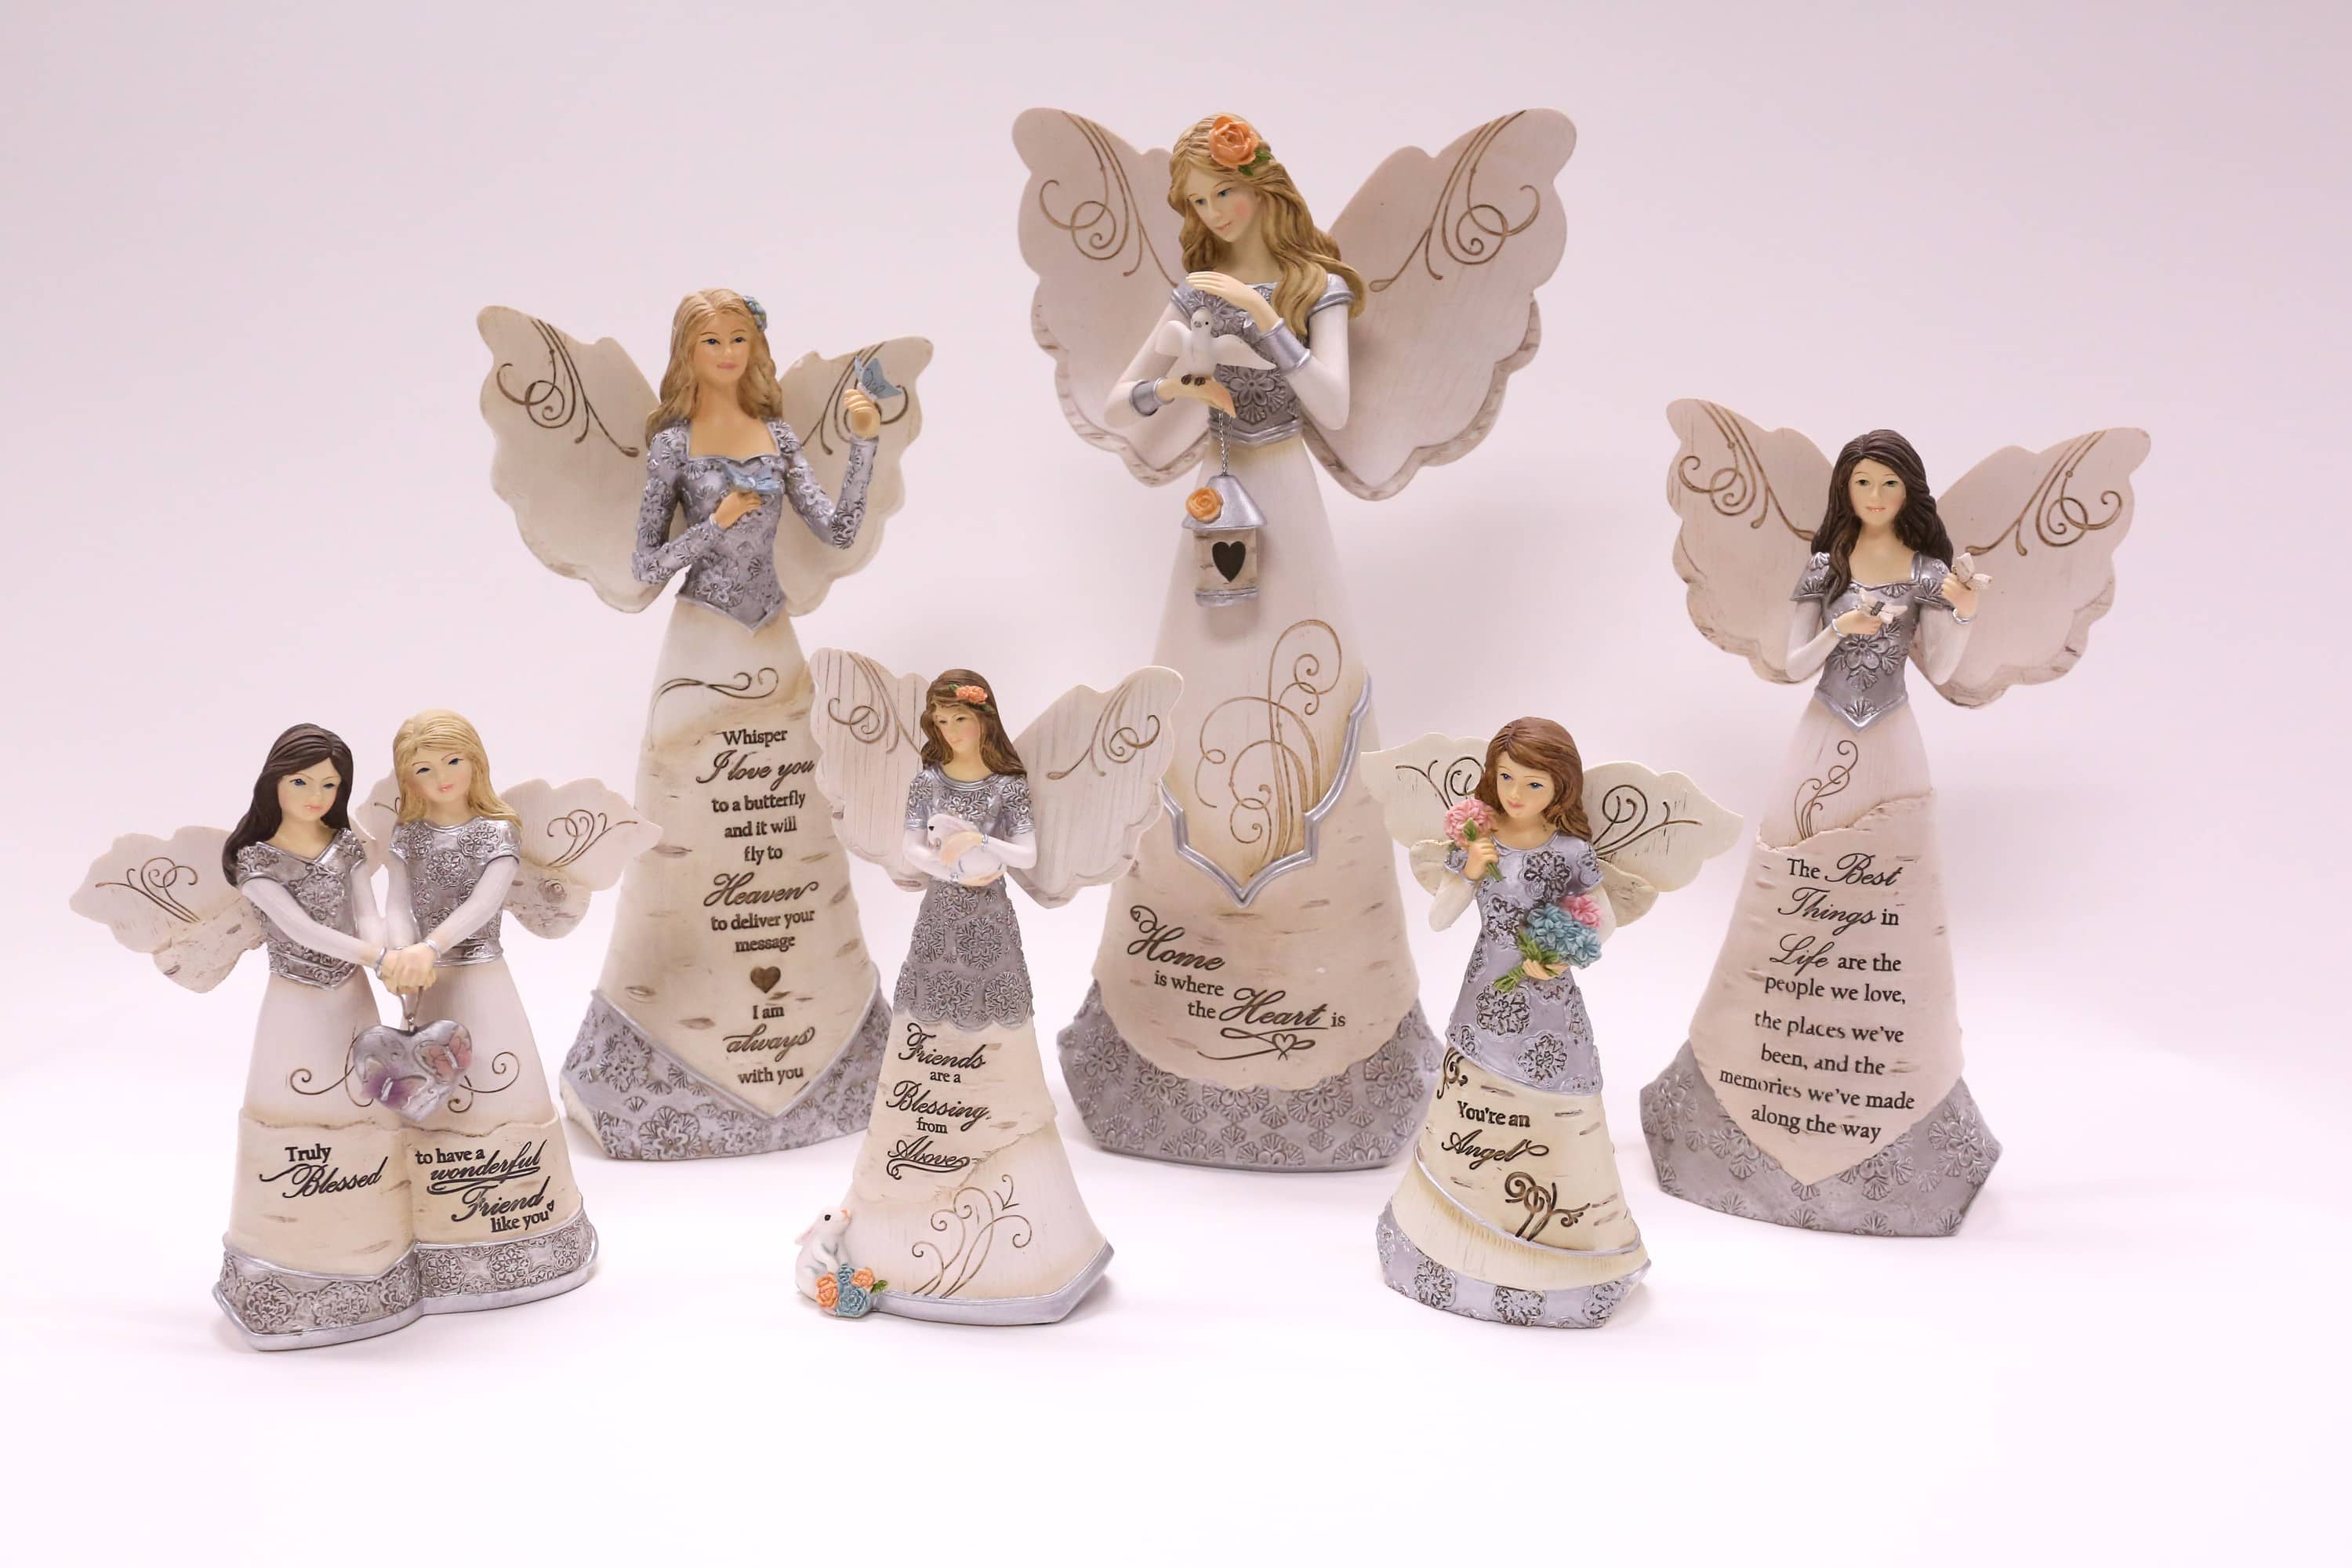 Angel figurines at Mikie's Ice Cream & Green Cow Giftshop